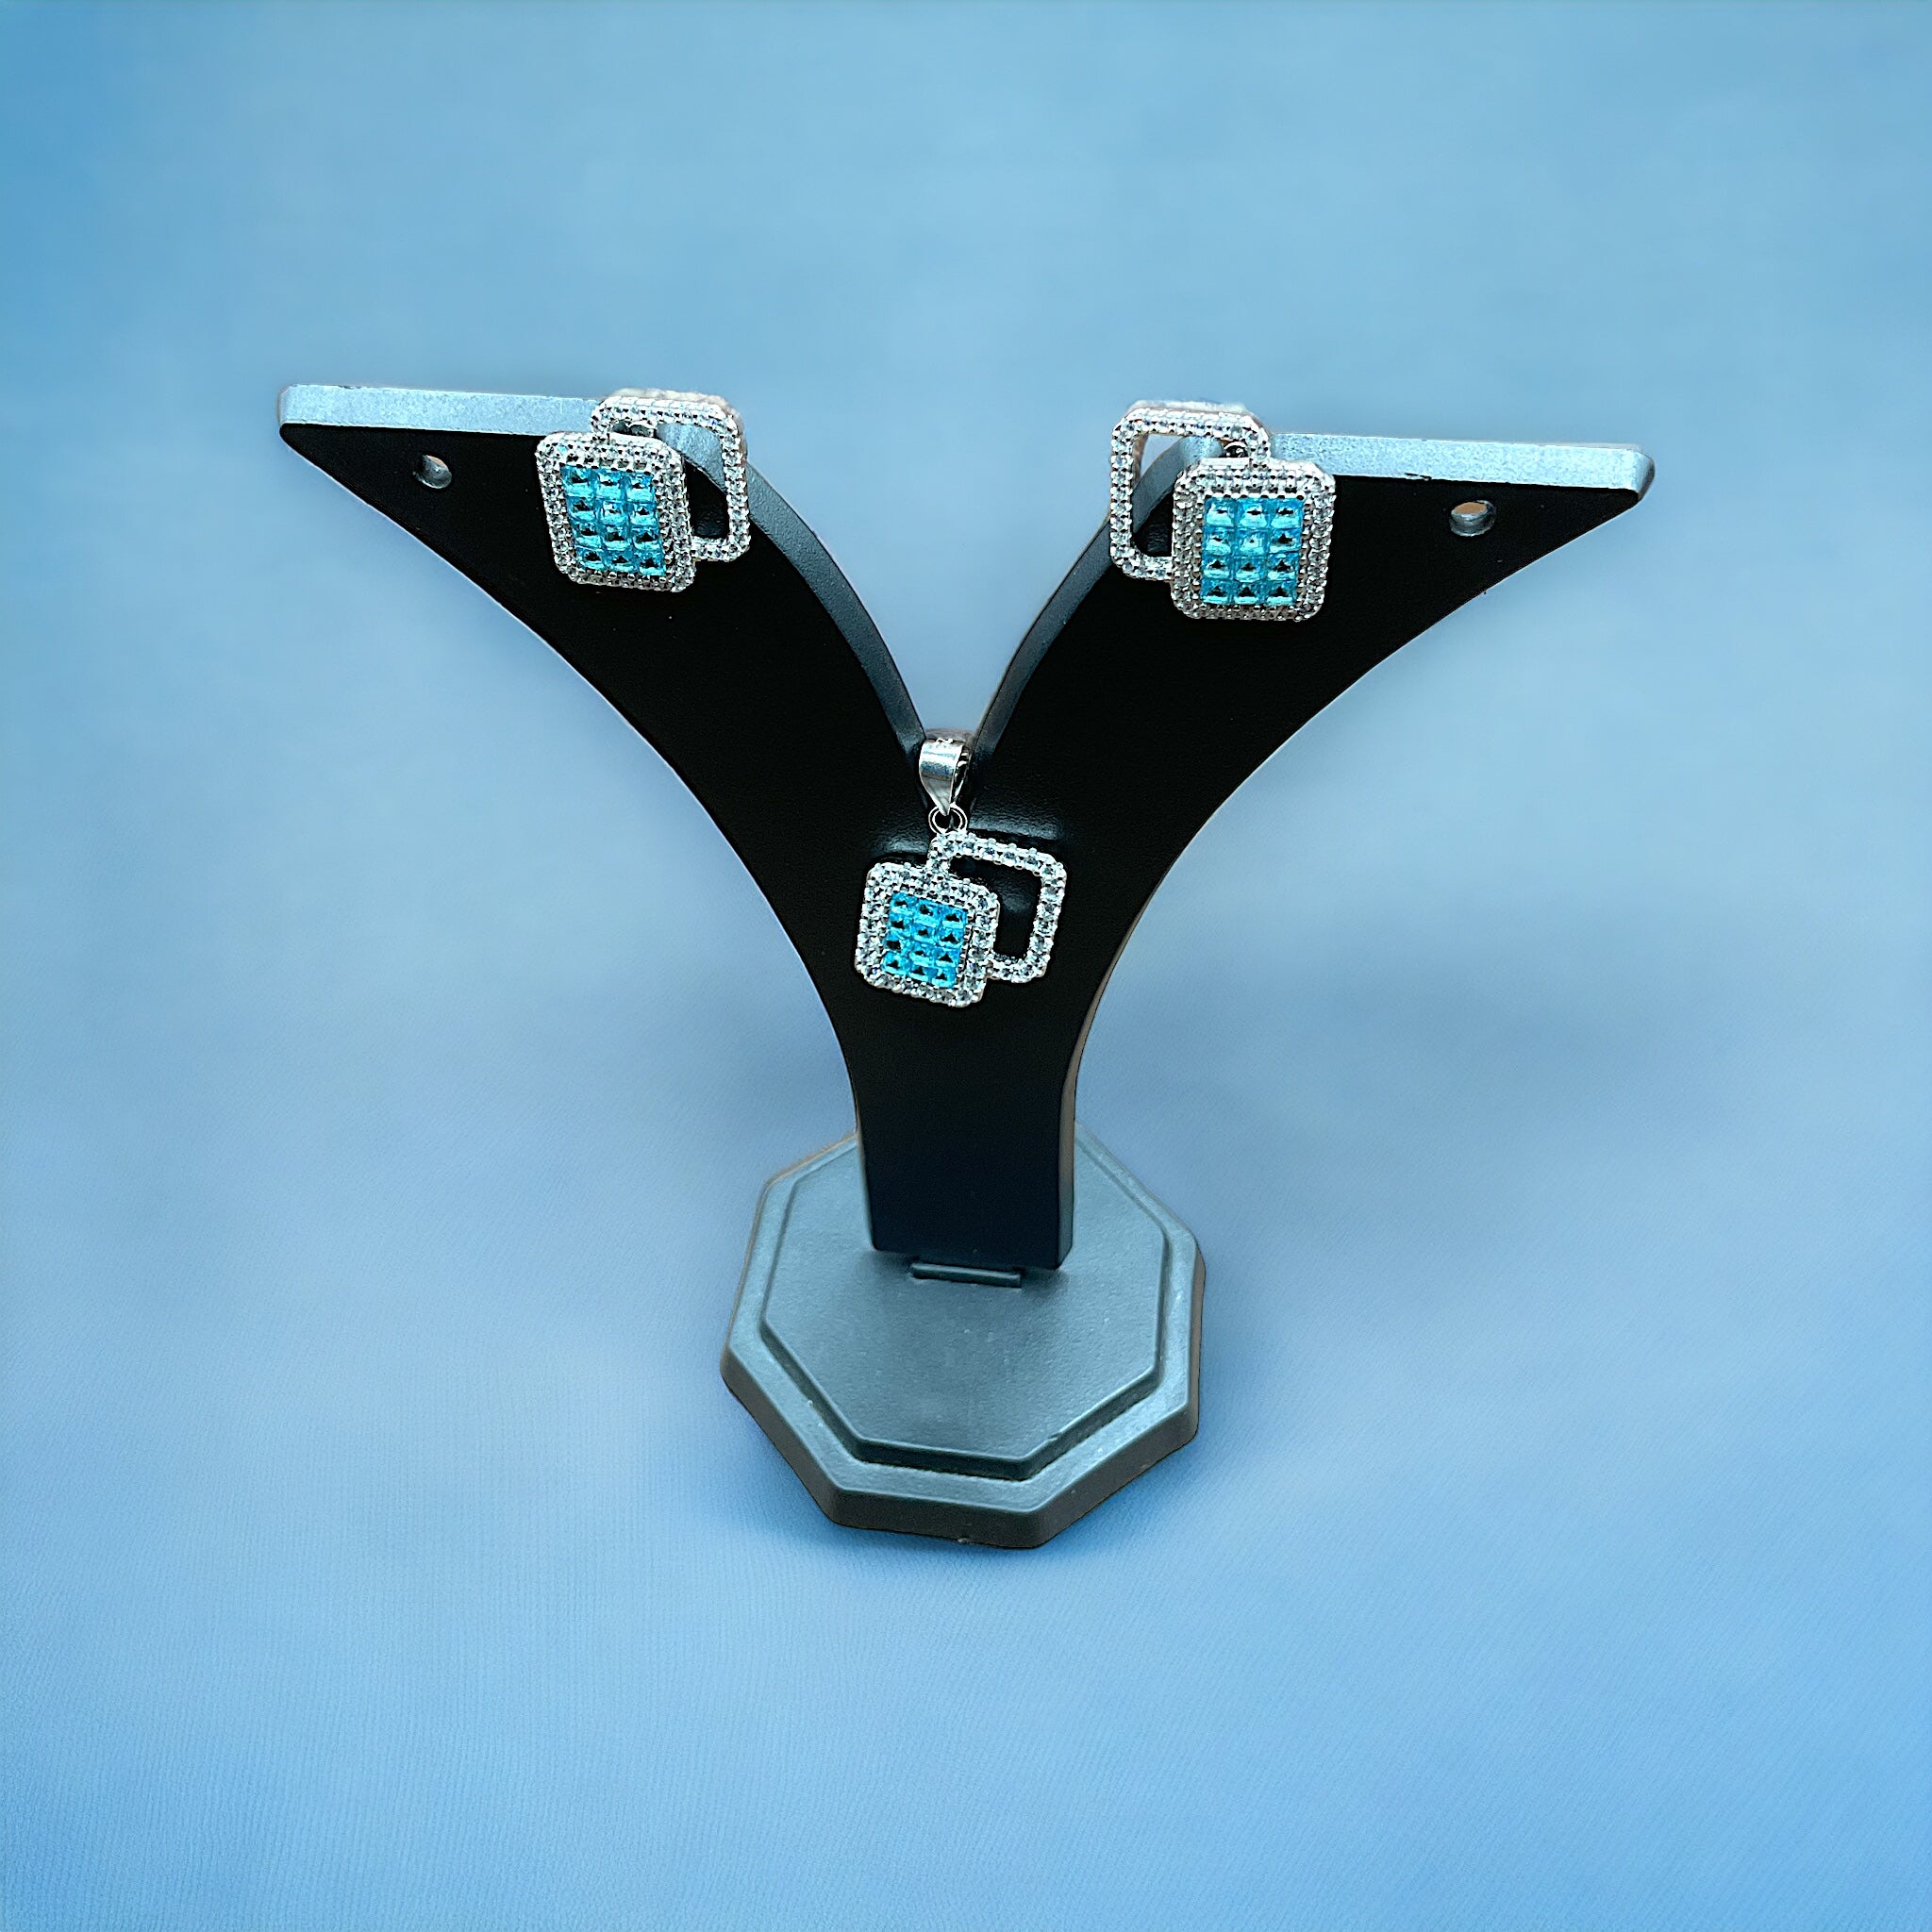 a pair of black and blue earrings on a stand